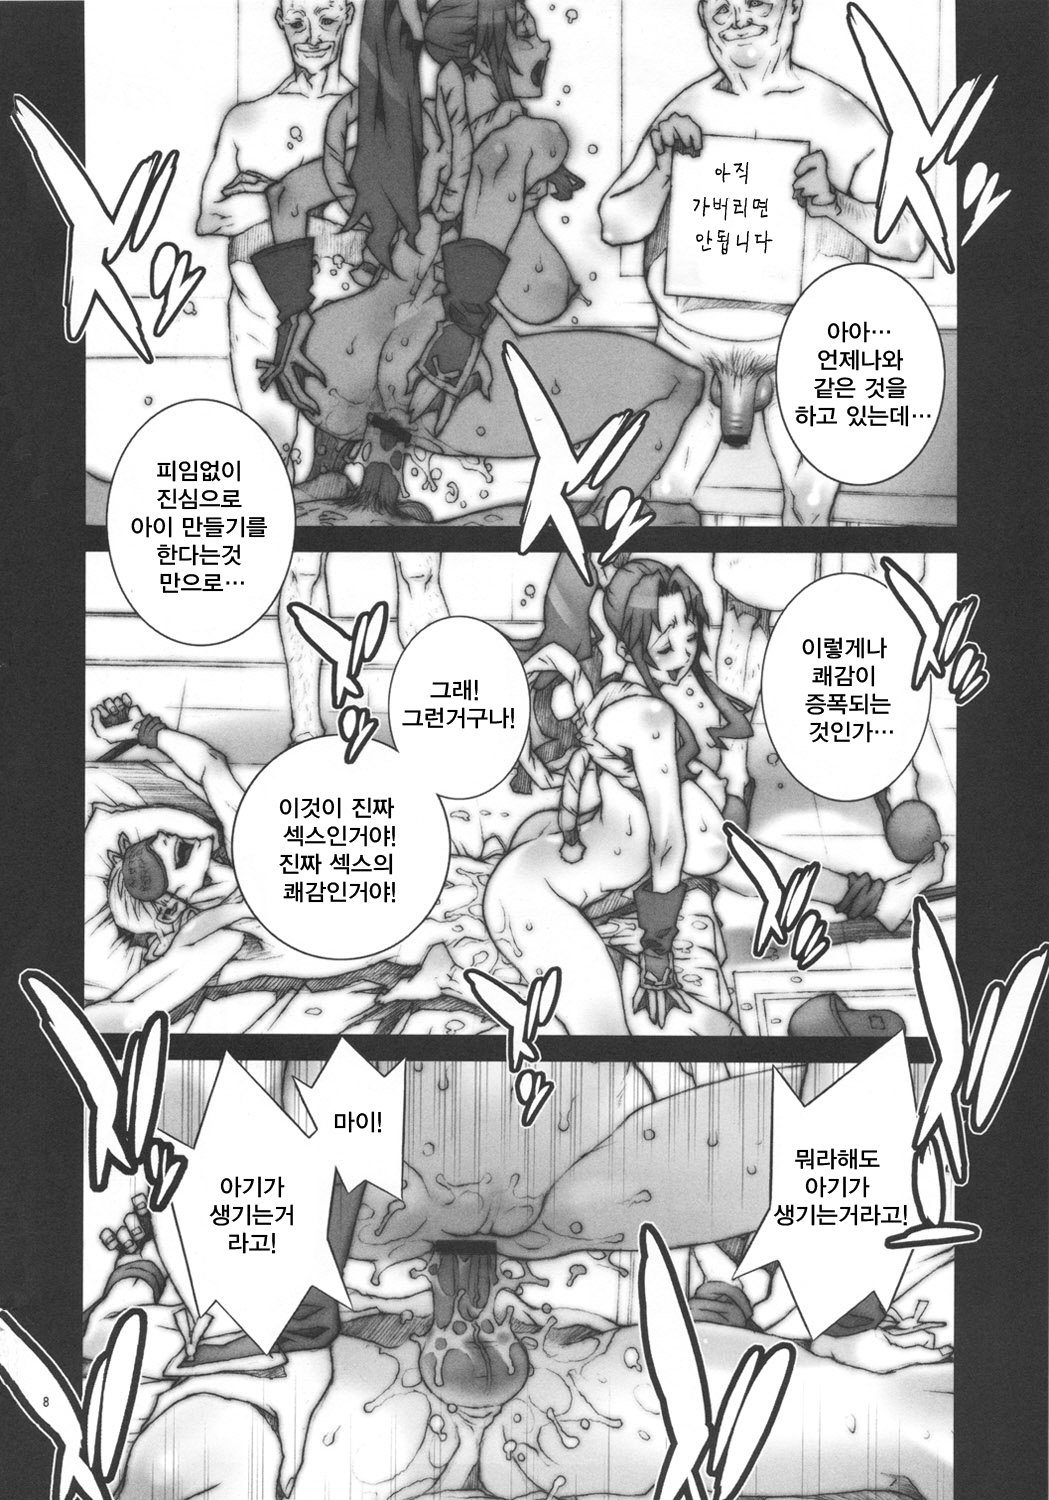 [P-collection (nori-haru)] Kachousen Roku | 화접선 6 (King of Fighters) [Korean] [Project H] page 9 full